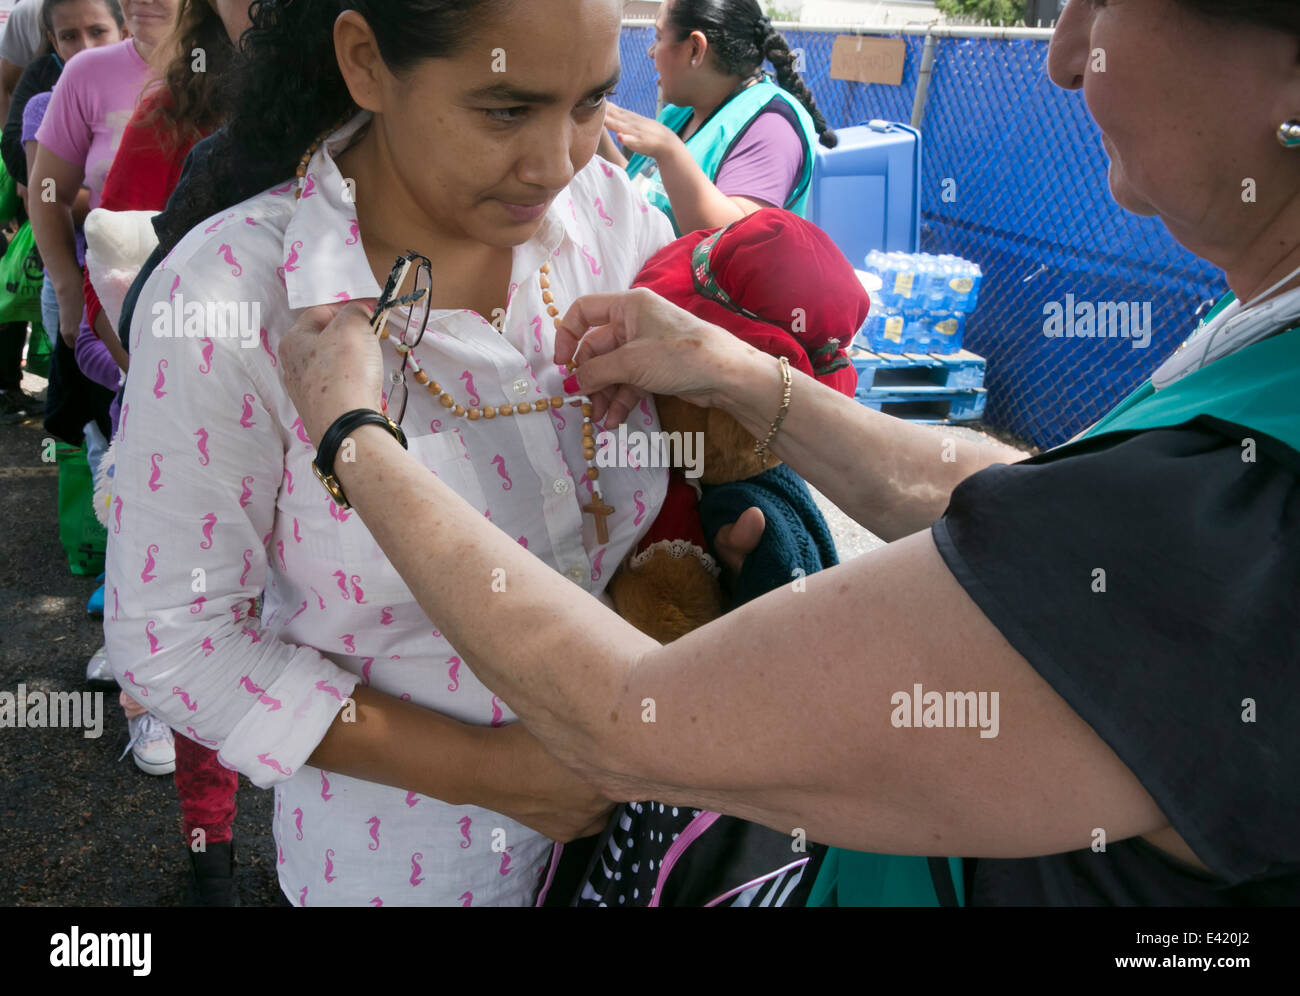 recently arrived to the USA immigrants receive food, shelter from Catholic Charity shelter in McAllen, Texas Stock Photo